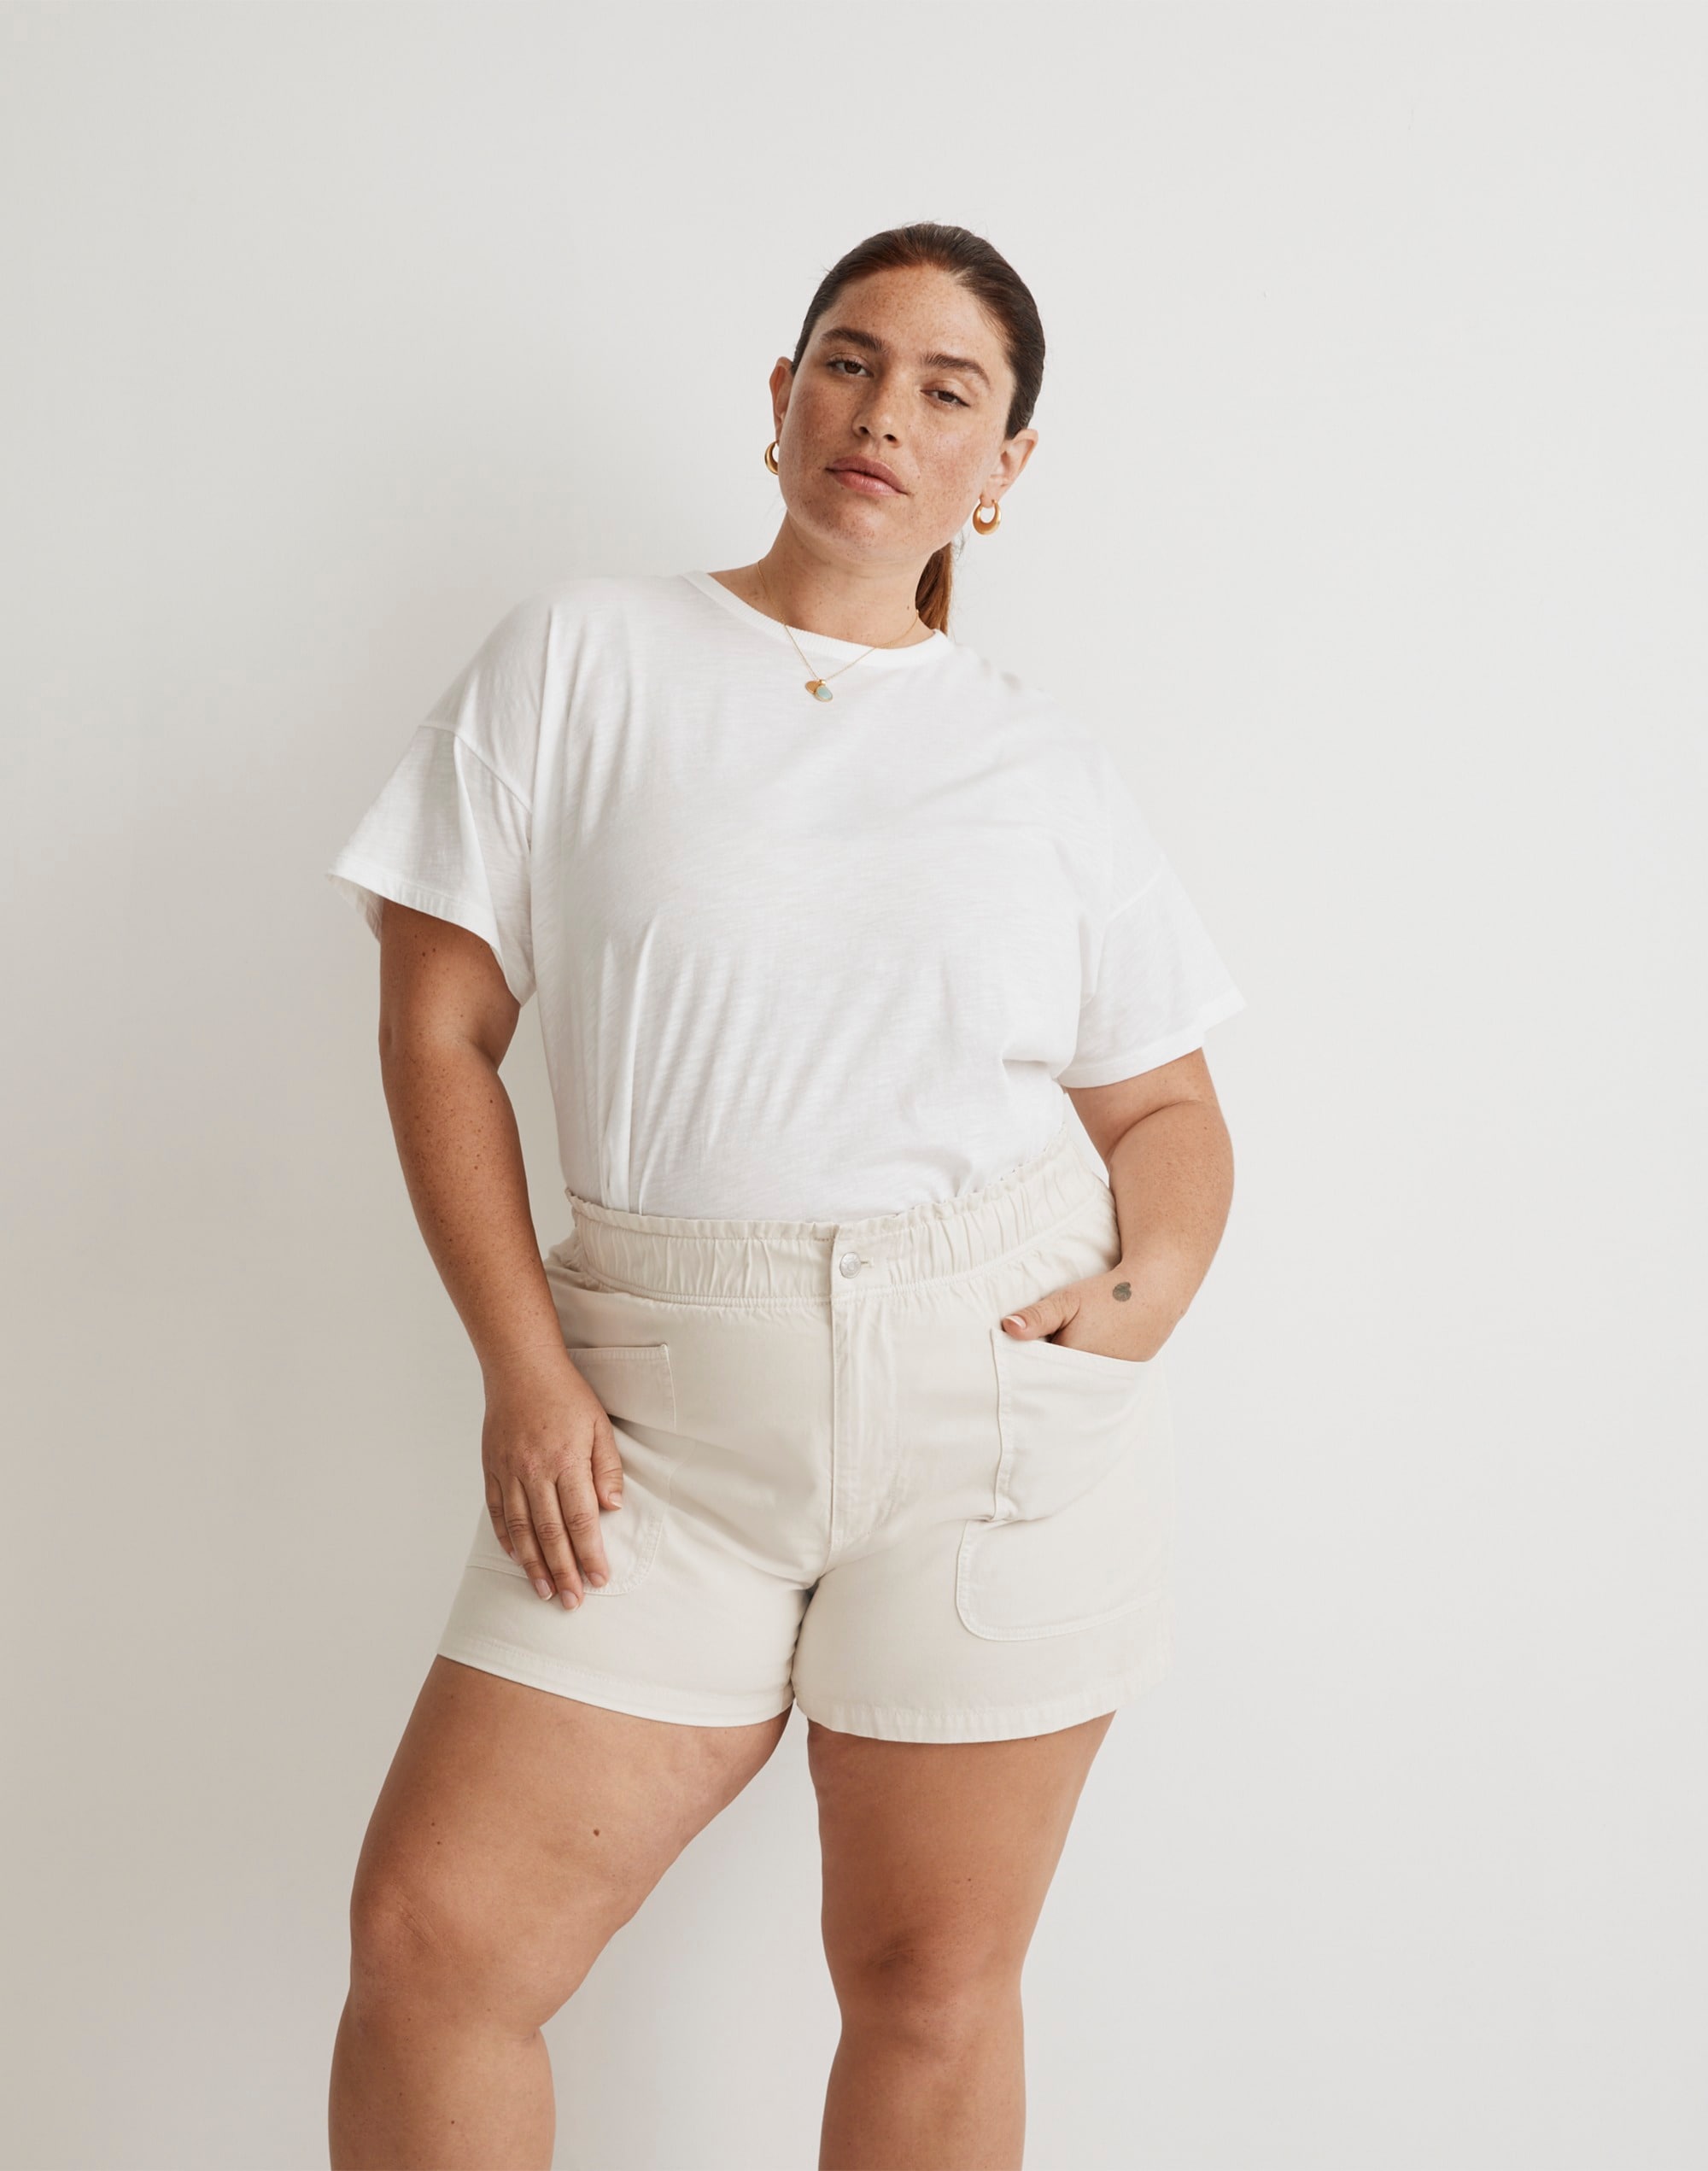 Plus Denim Pull-On Paperbag Utility Shorts: Garment-Dyed Edition